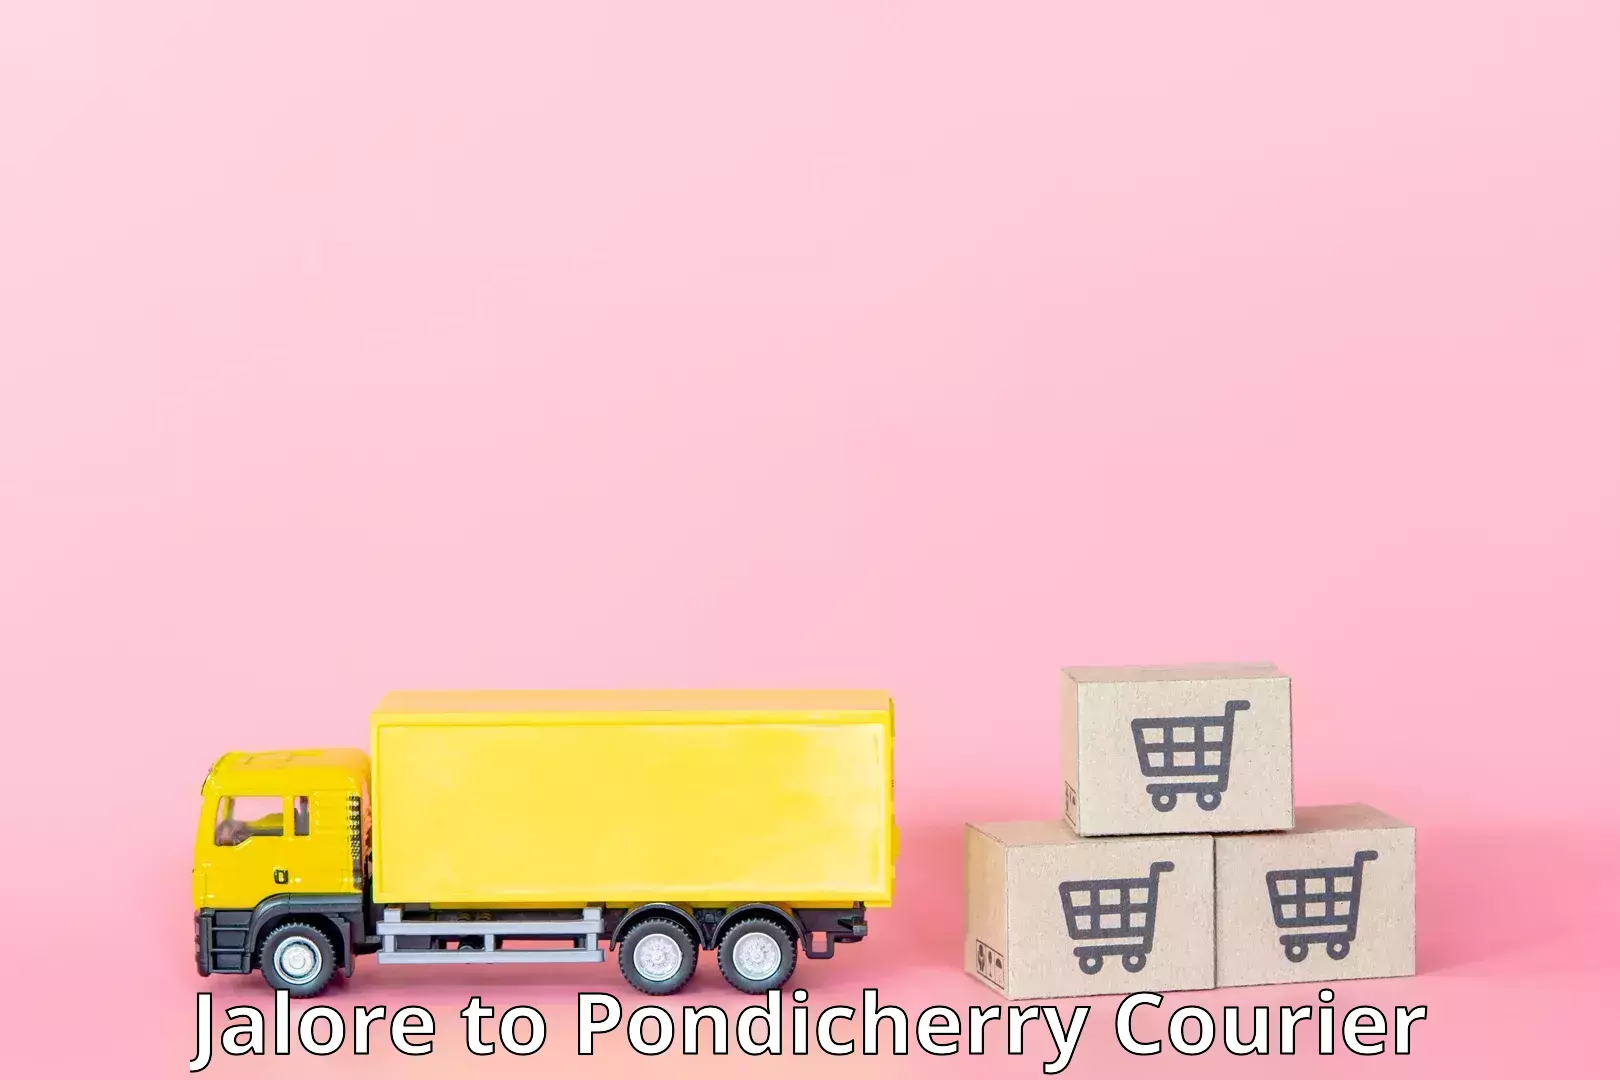 Nationwide shipping coverage Jalore to Pondicherry